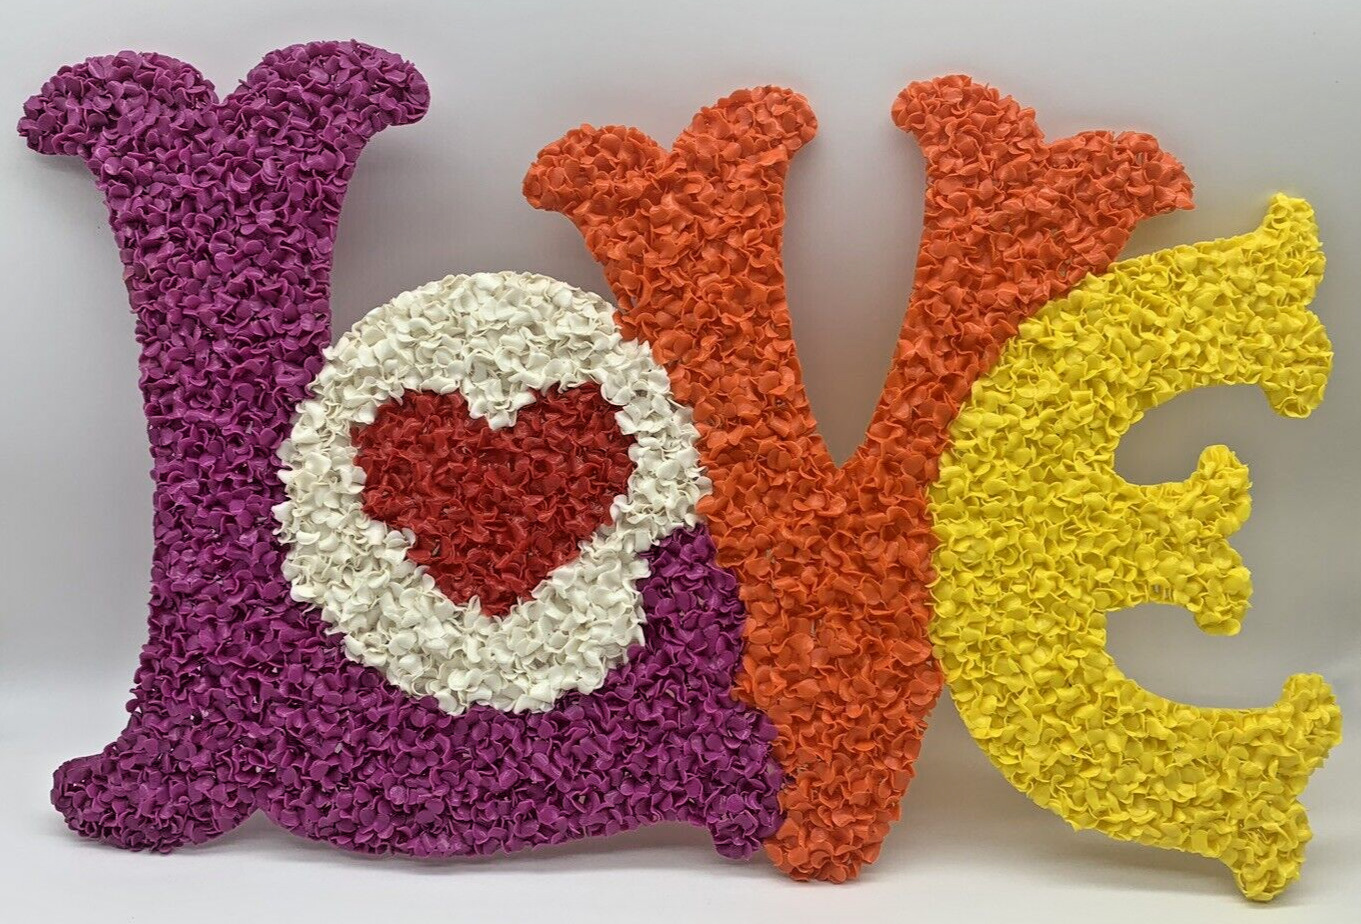 Vintage 1960s 1970s Groovy Love Melted Plastic Popcorn Wall Art Hanging Decor